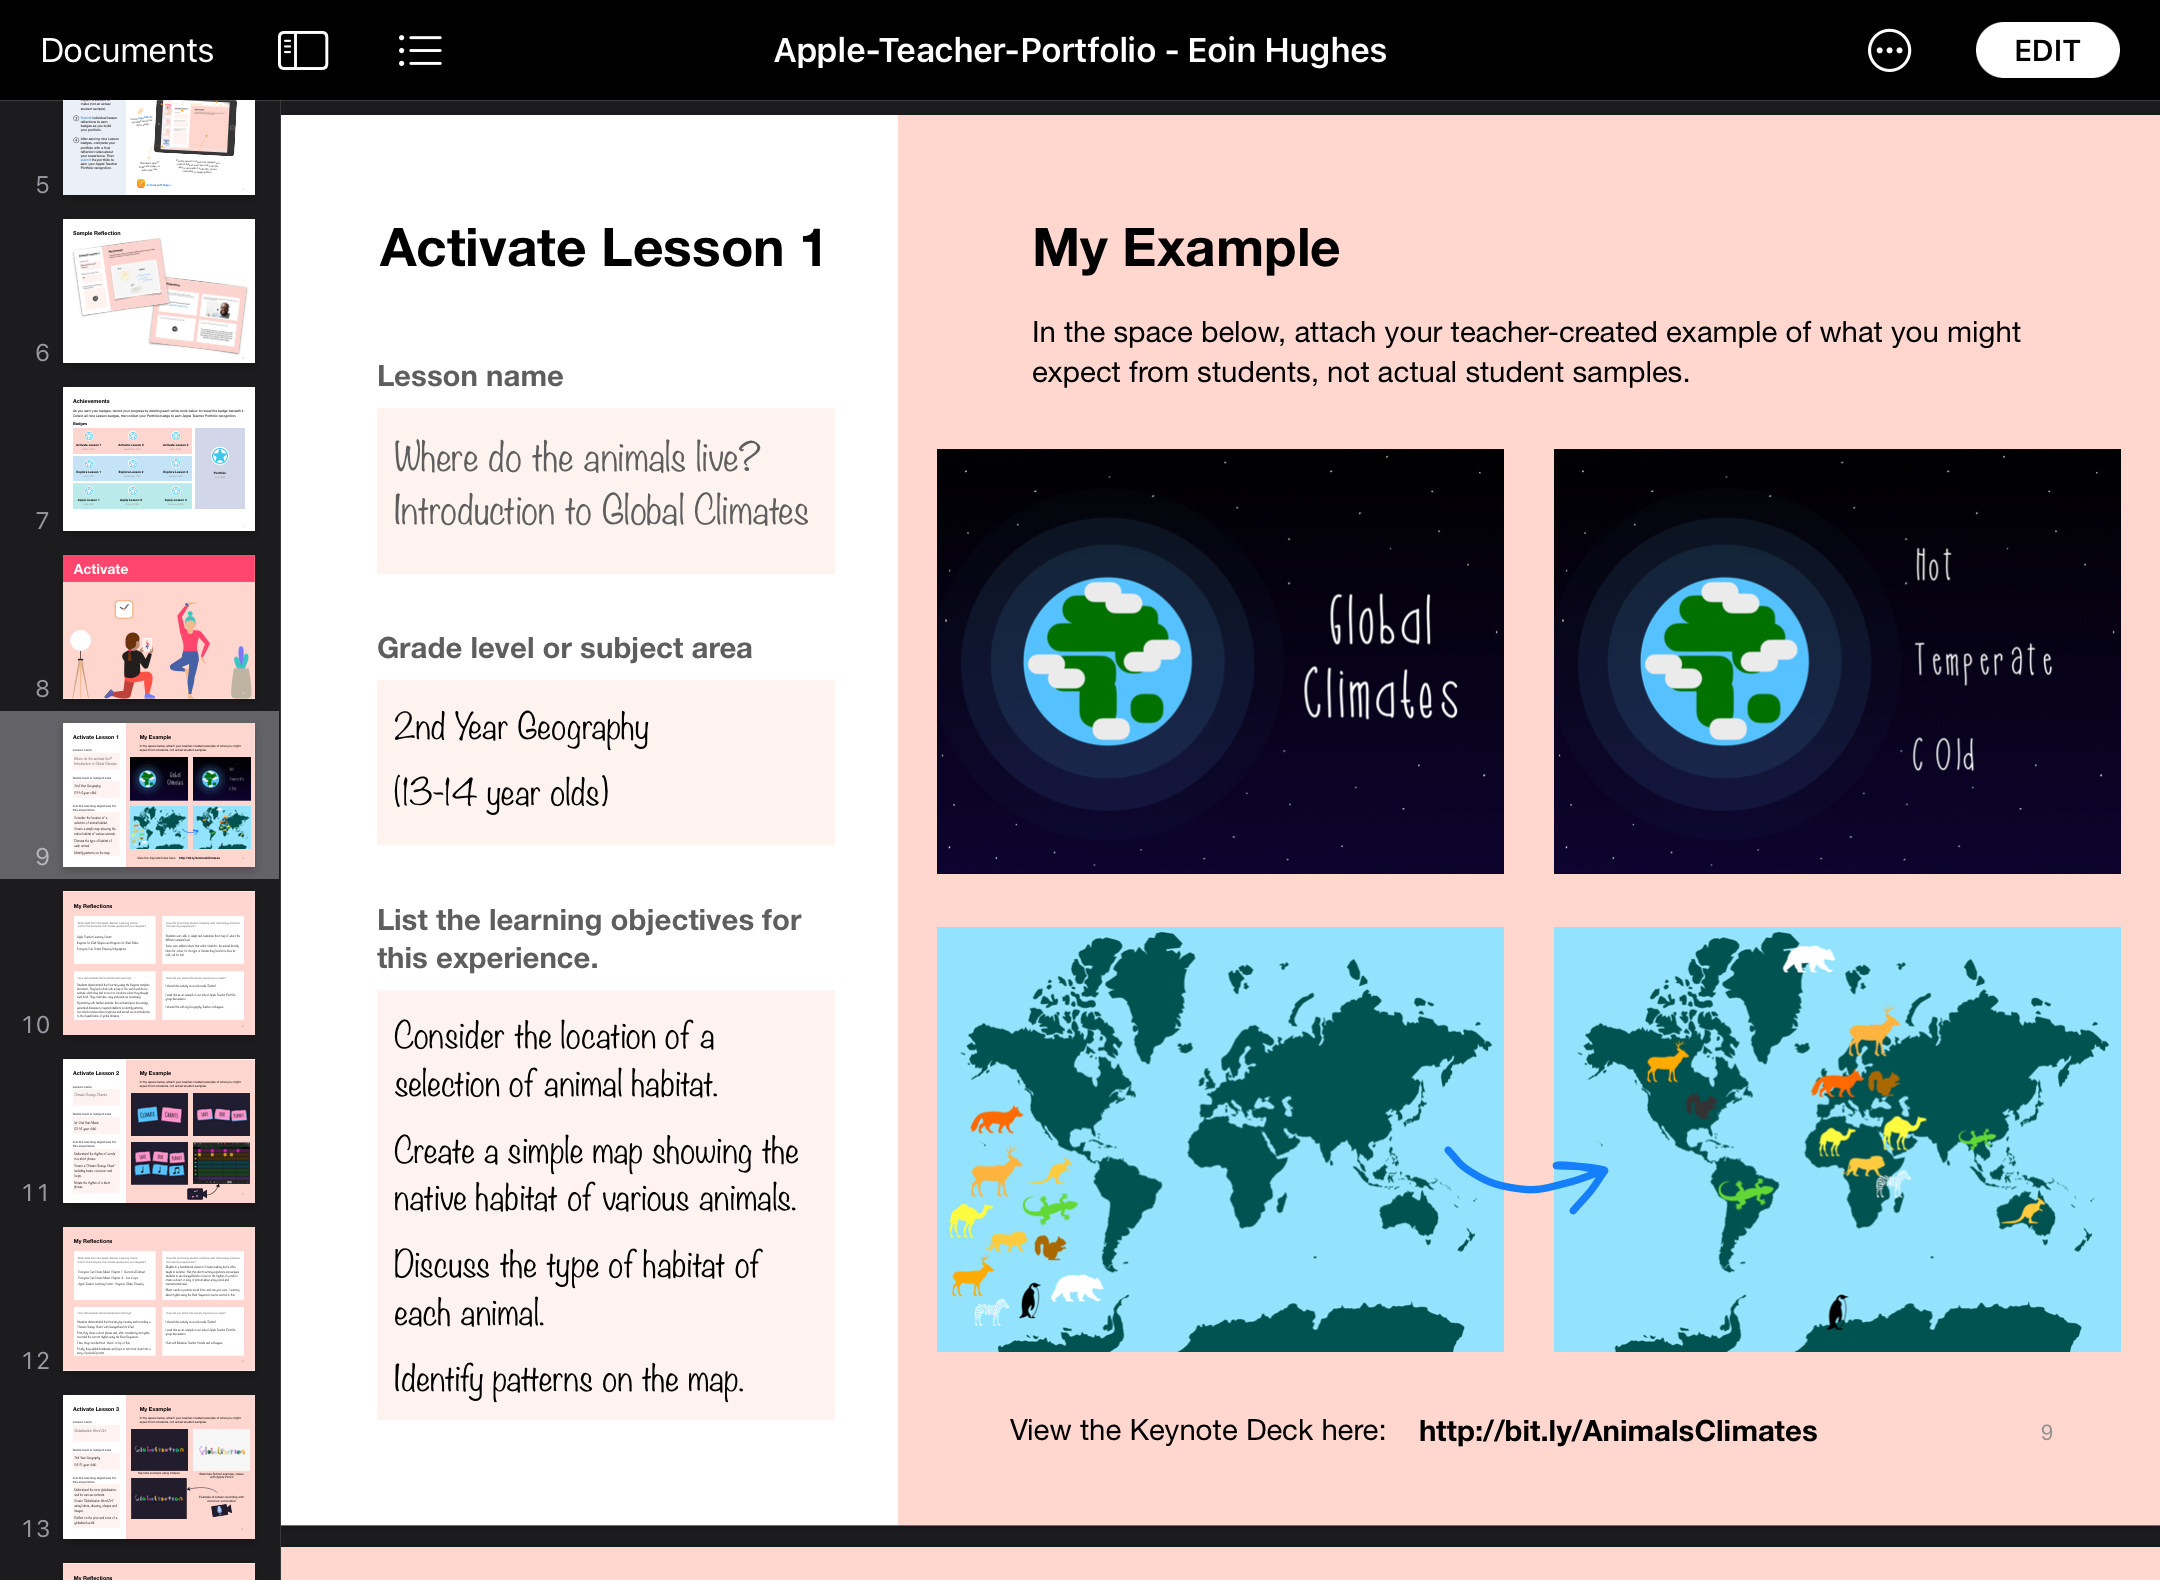 Apple Teacher Portfolio Activate lesson 1 screenshot. Includes the lesson name, learning objectives & lesson example images. 